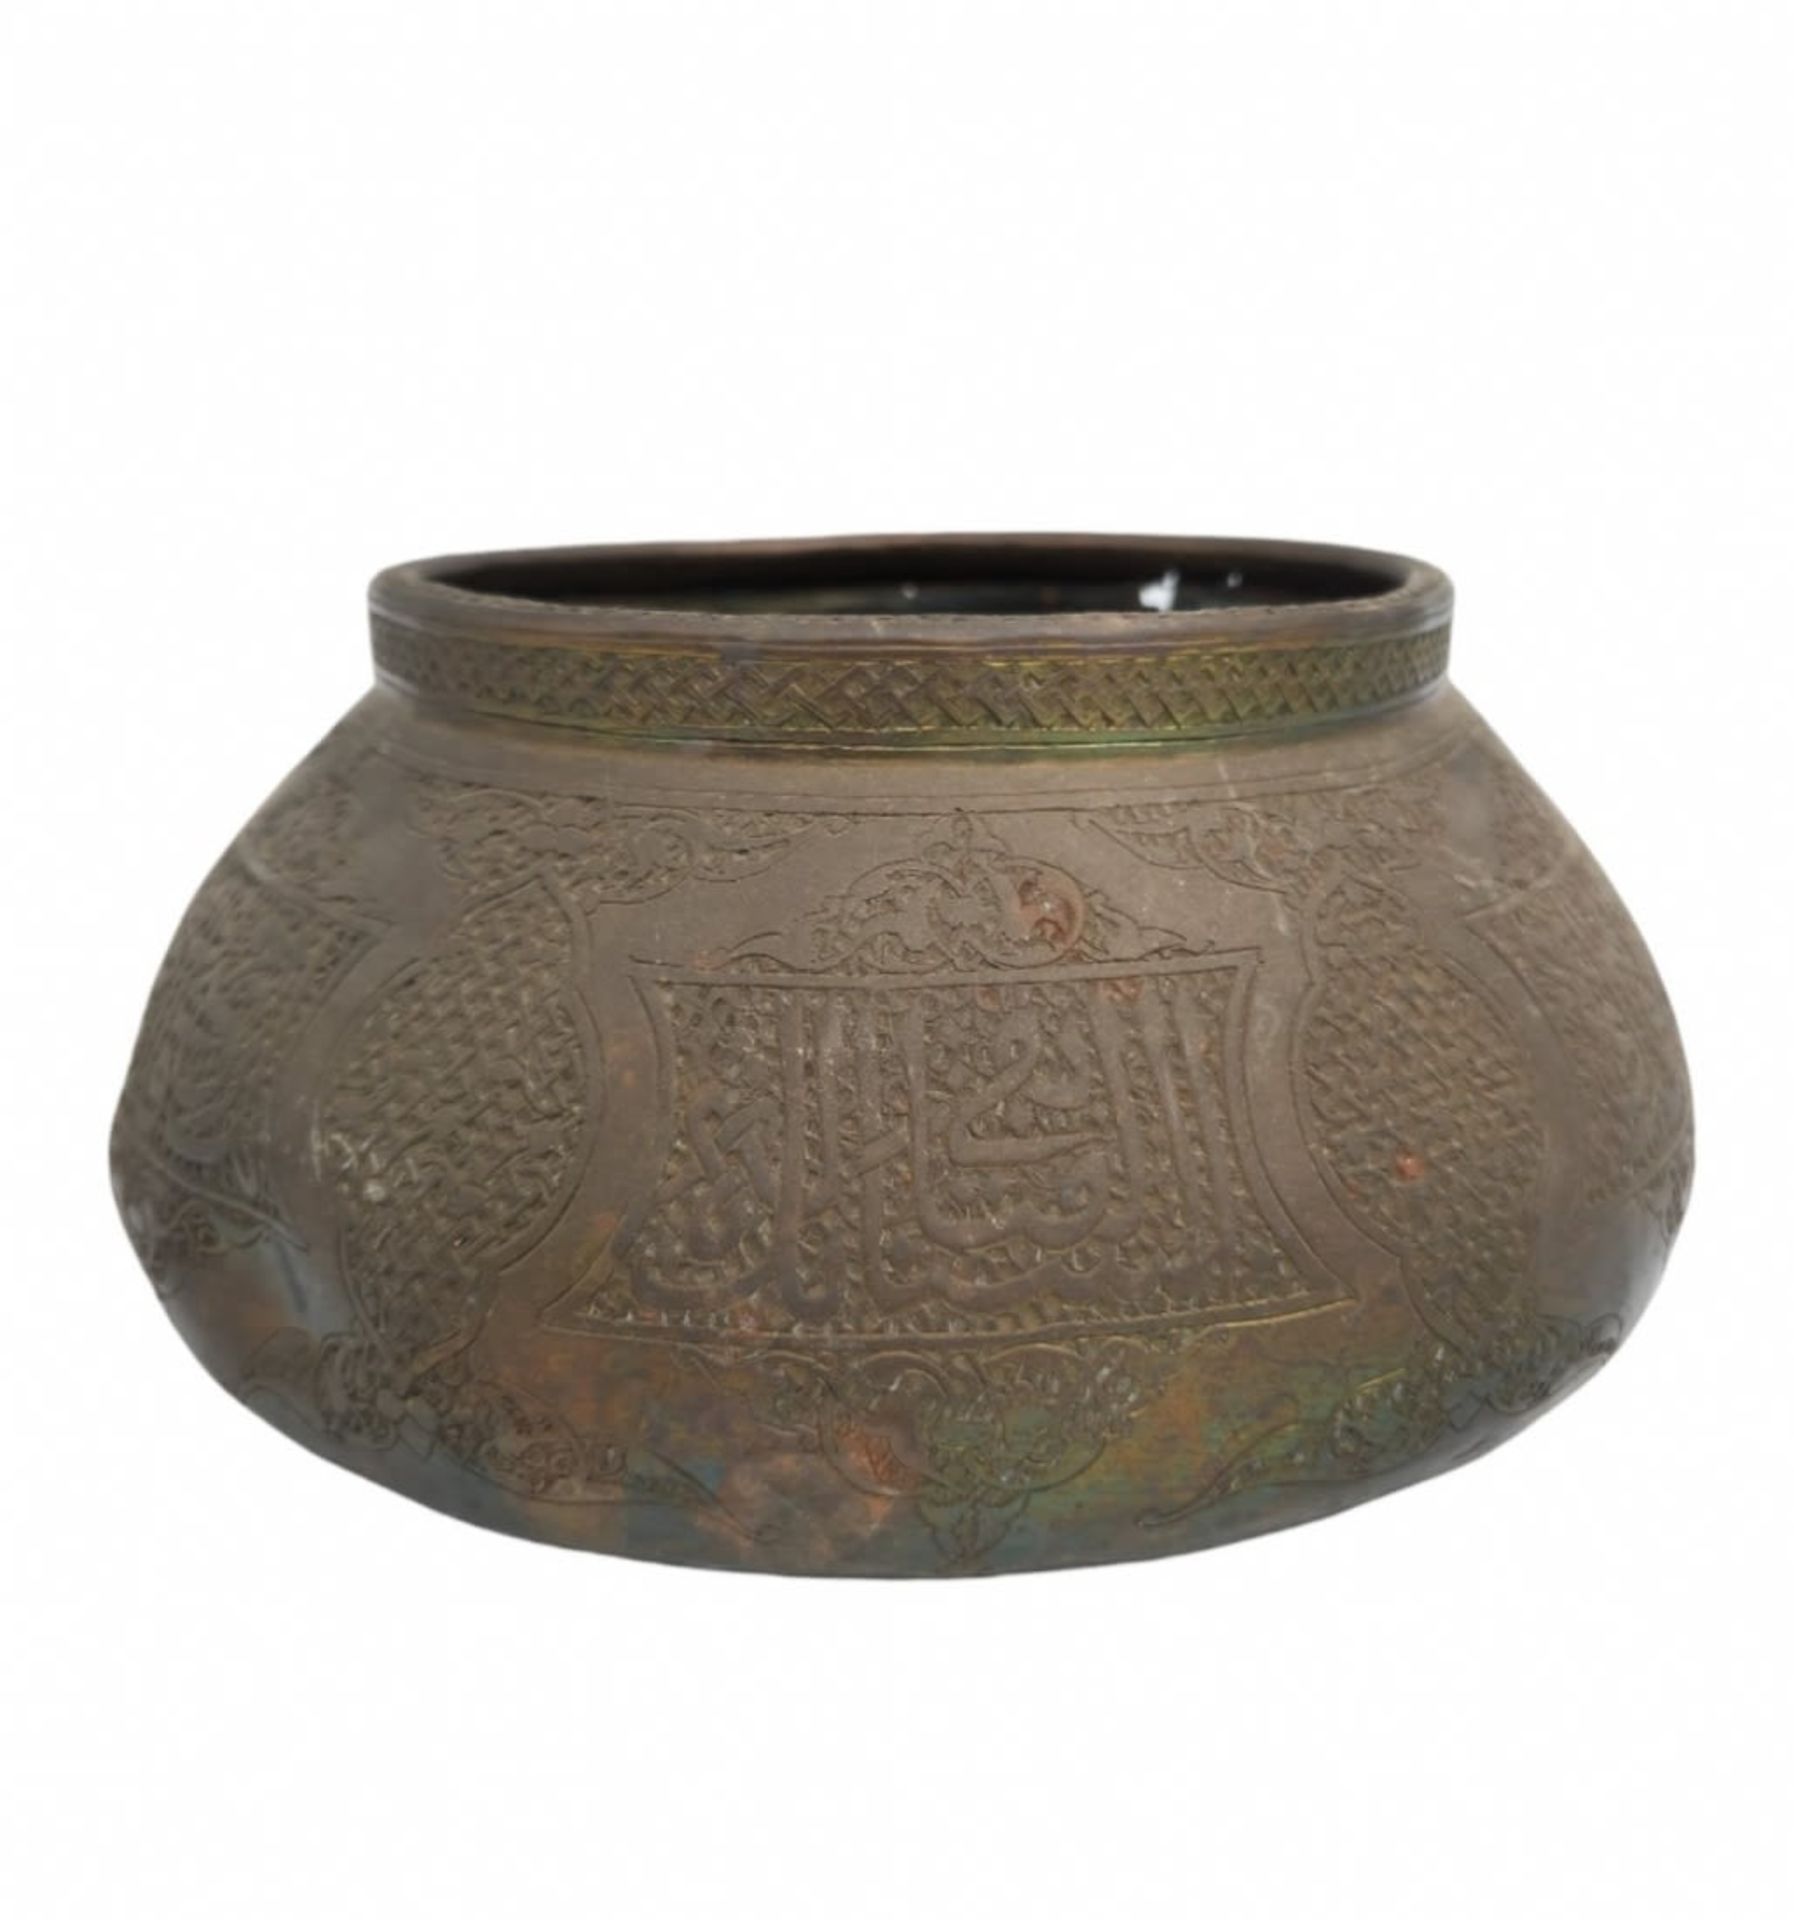 An antique Islamic vessel, made of dense hand-hammered brass, Syria, the last third of the 19th